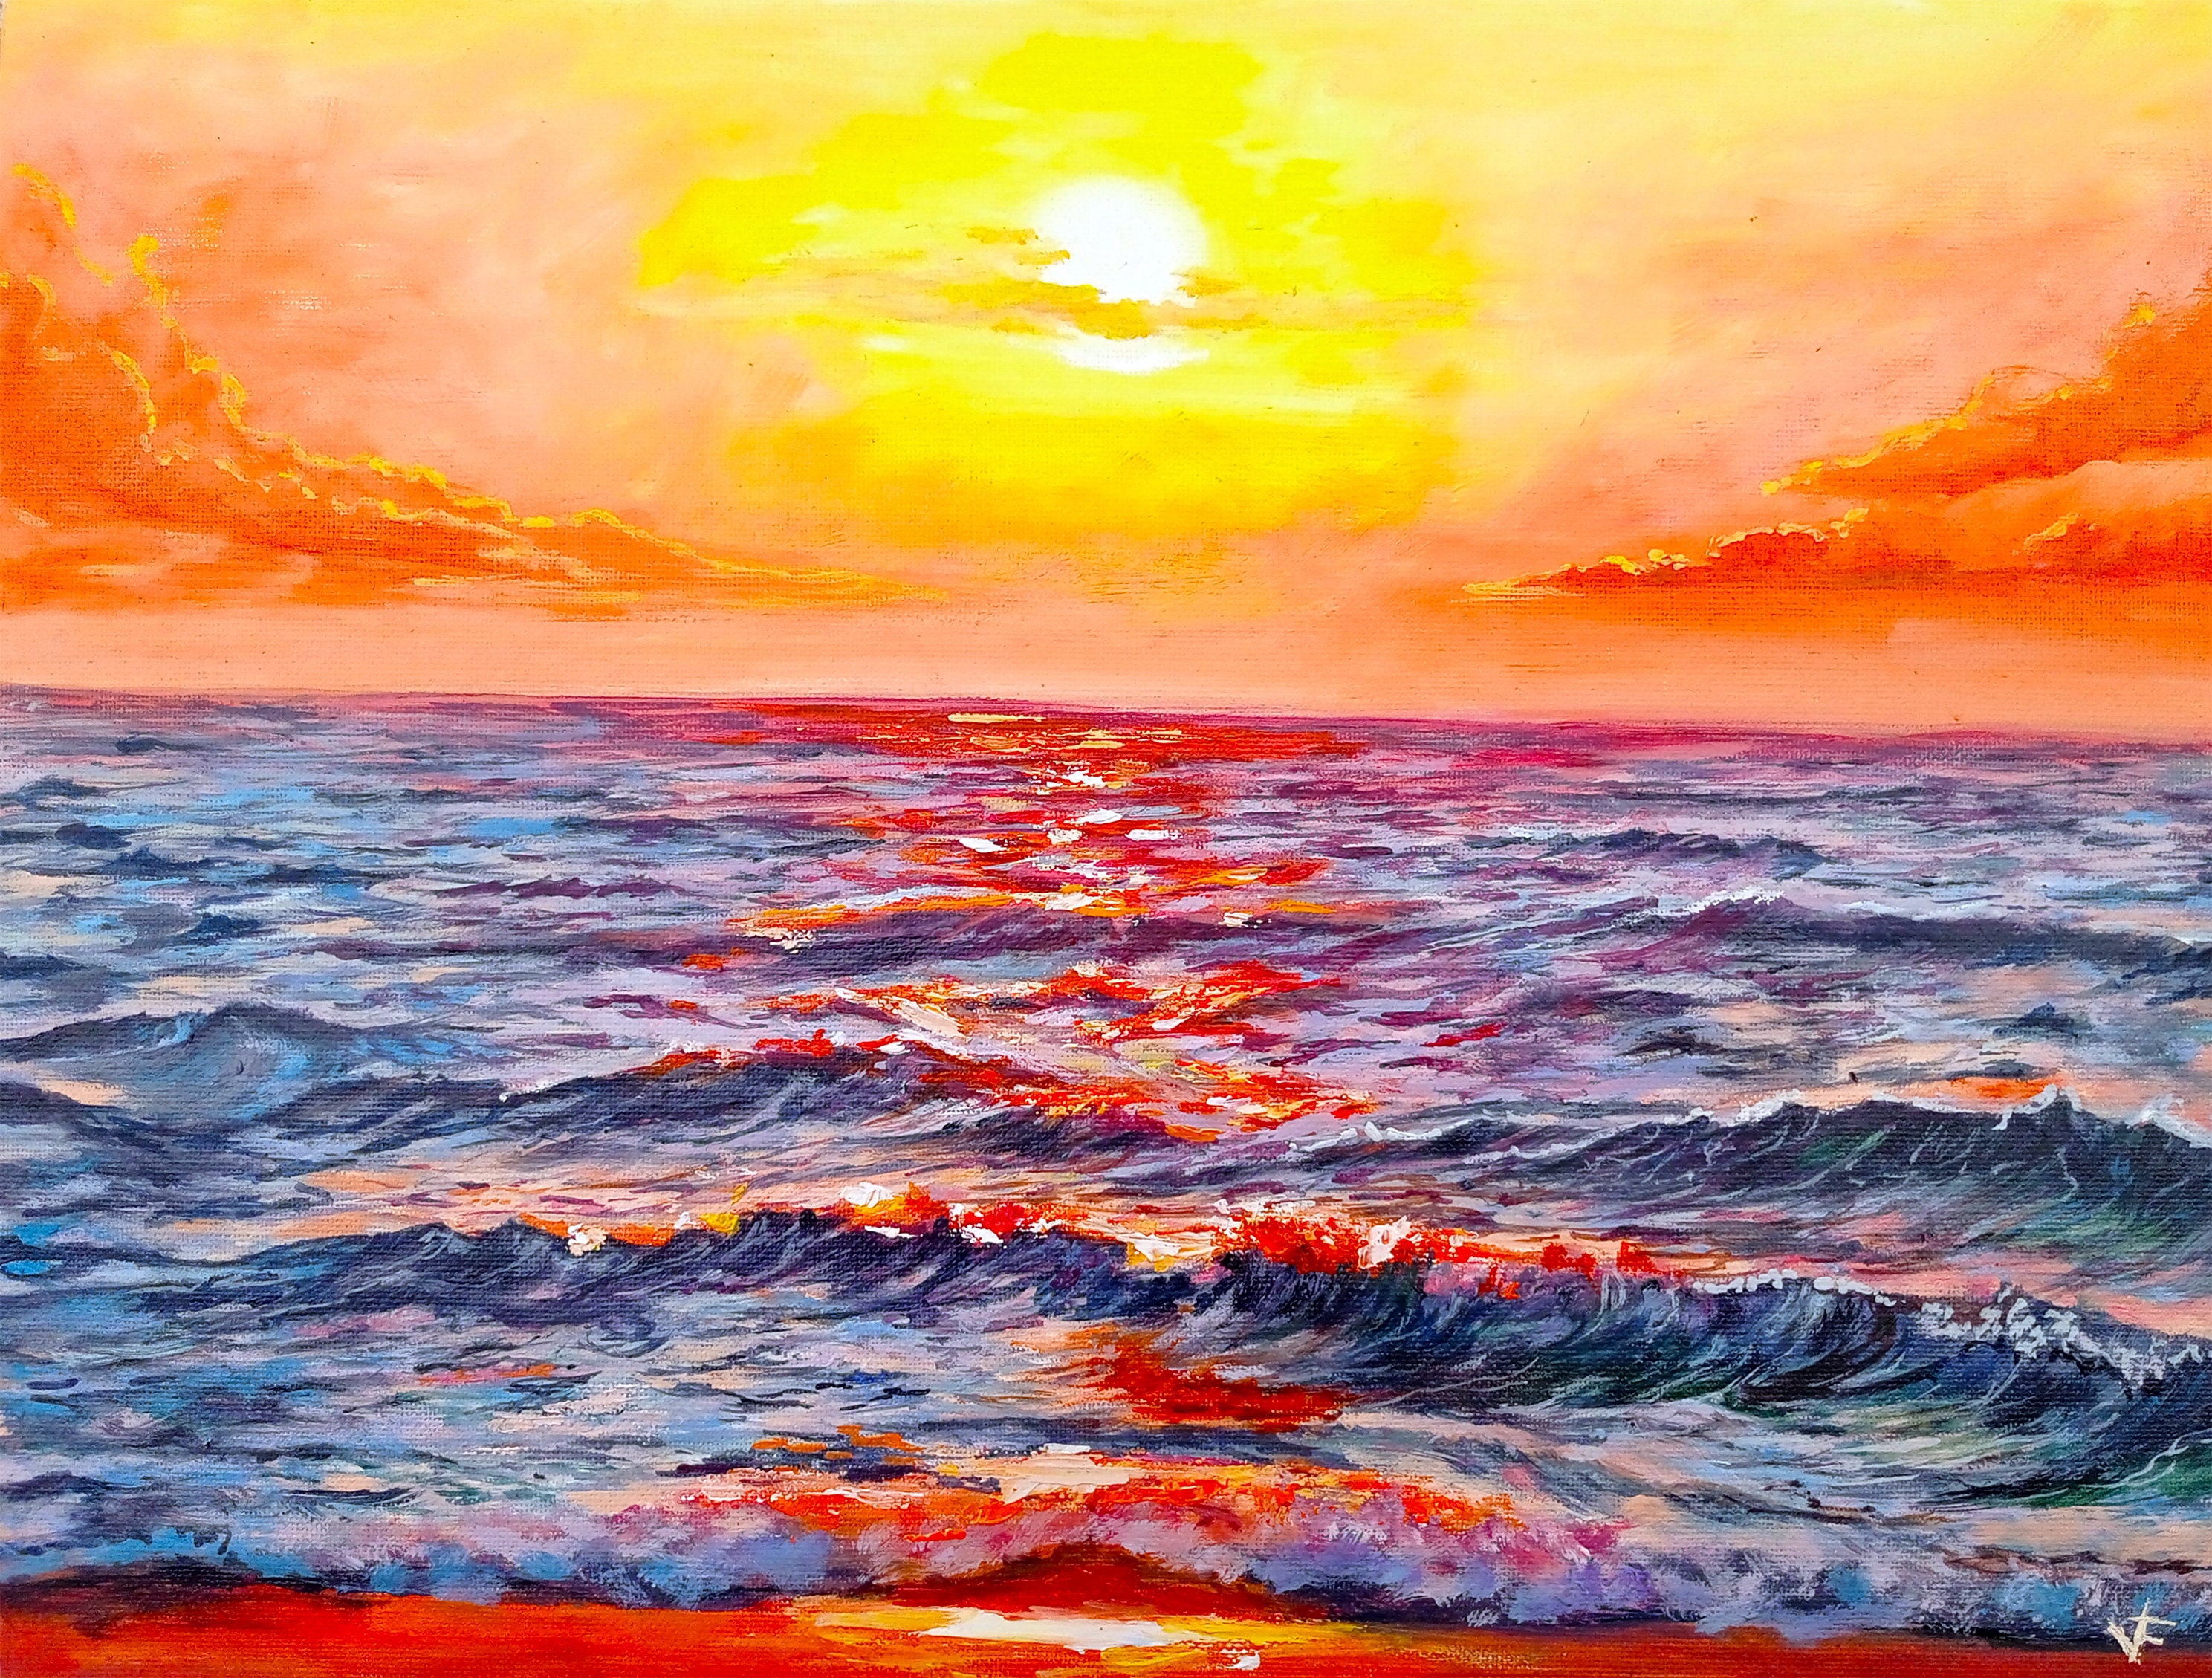 Be The Light - Original Realistic Sunset over the Ocean Painting oil on  round 20 canvas